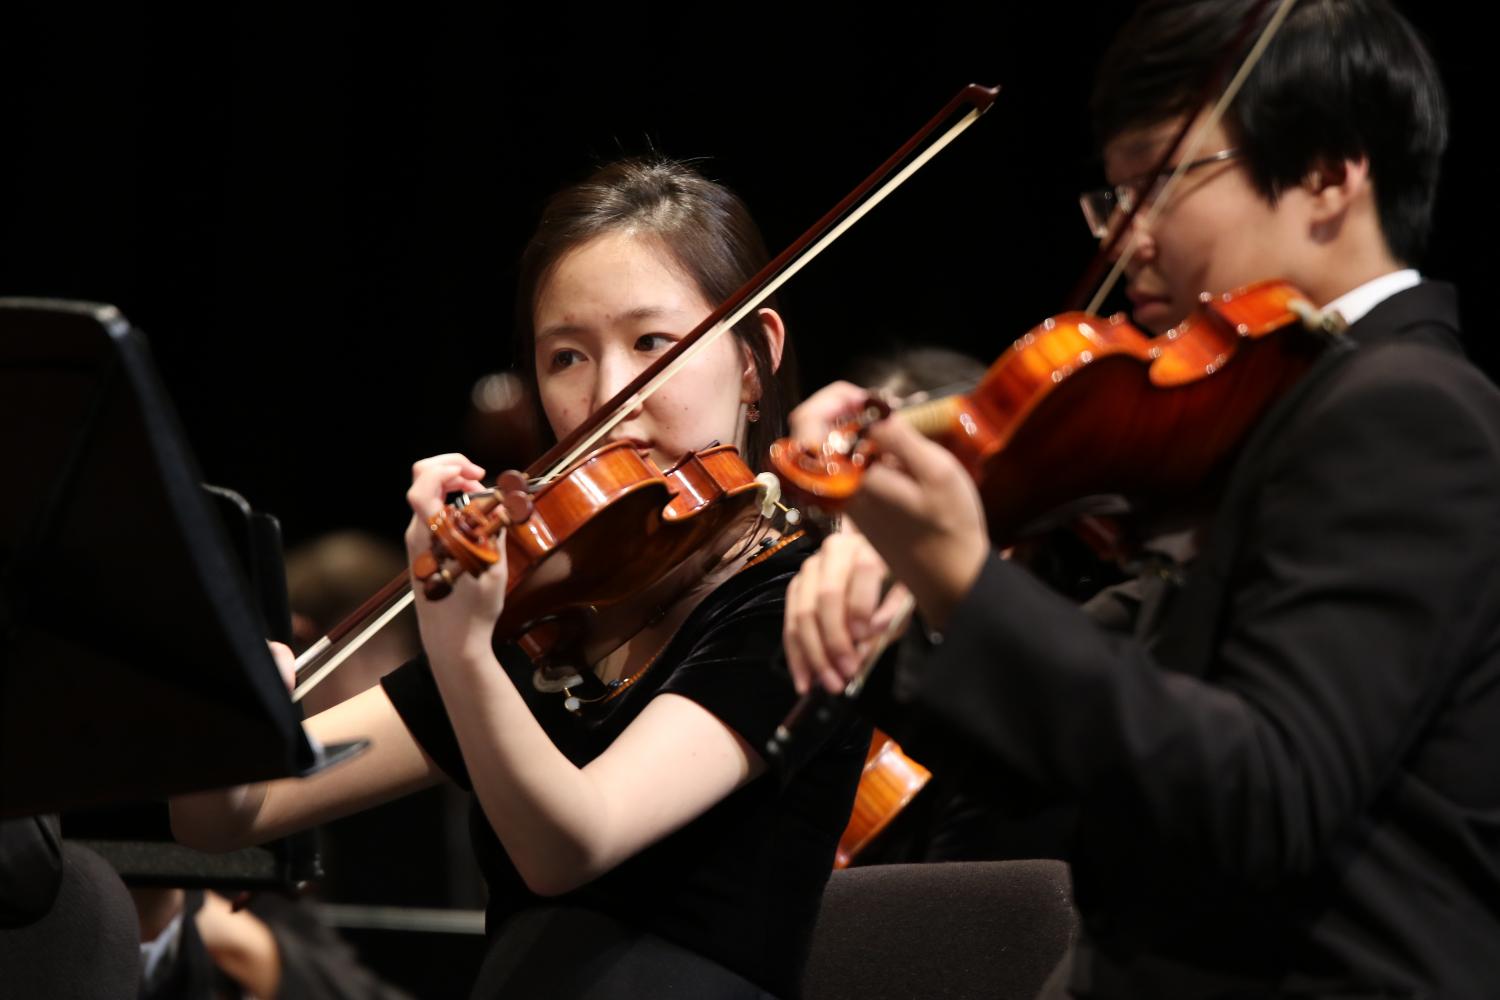 Orchestra+Presents+the+Music+of+Beethoven+for+Fall+Concert